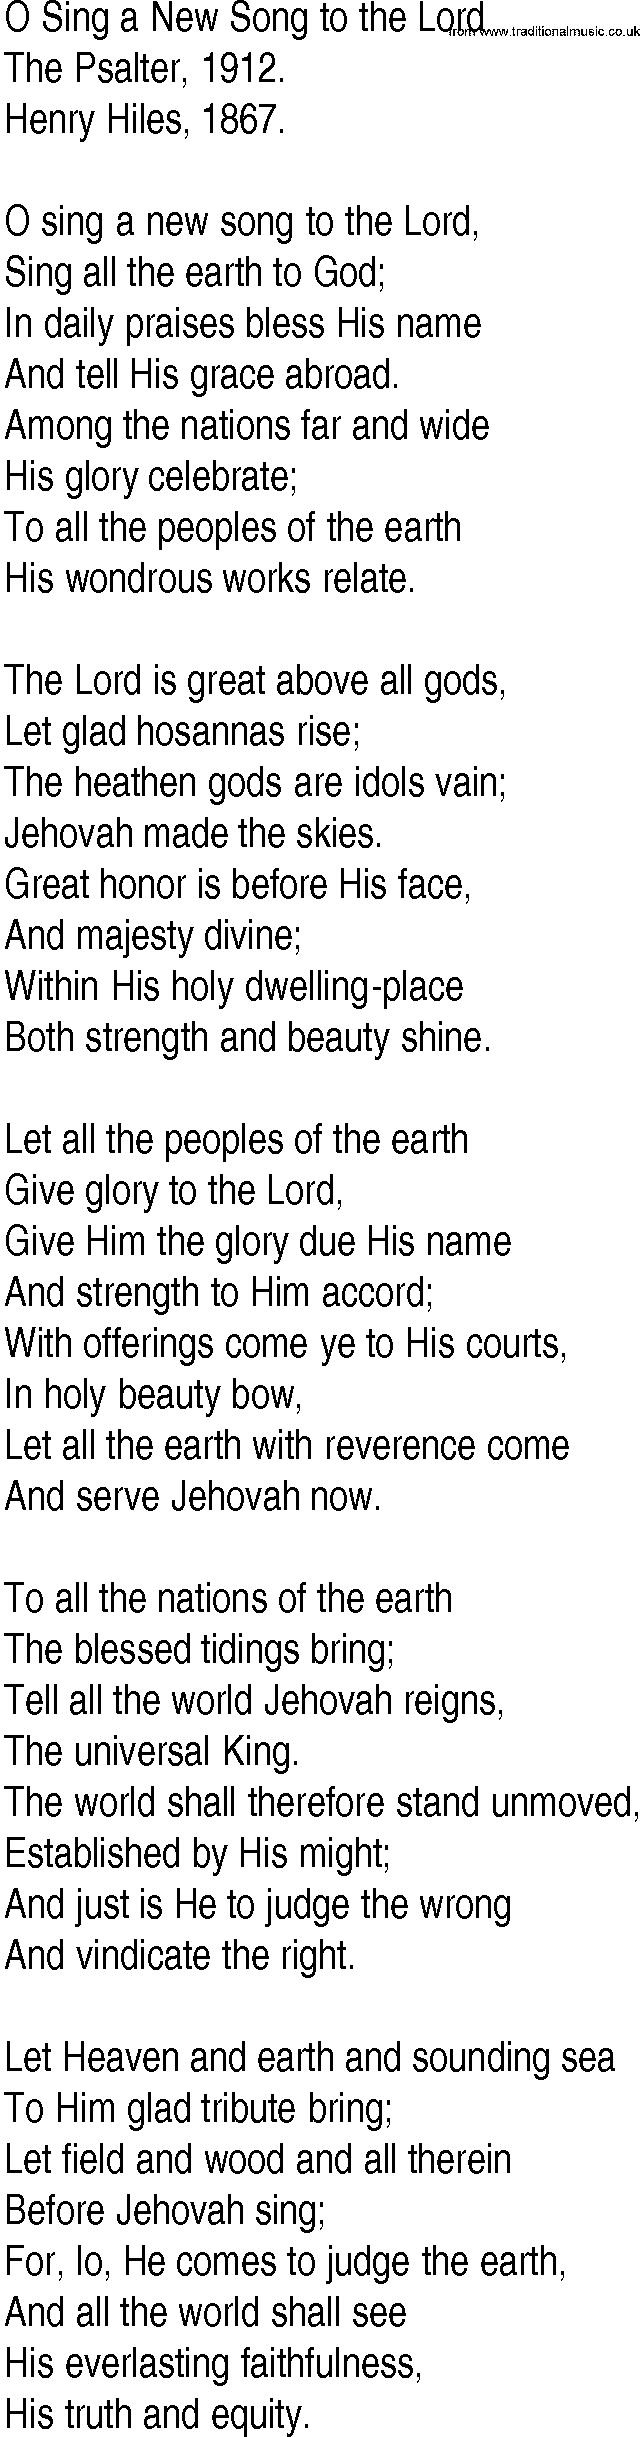 Hymn and Gospel Song: O Sing a New Song to the Lord by The Psalter lyrics